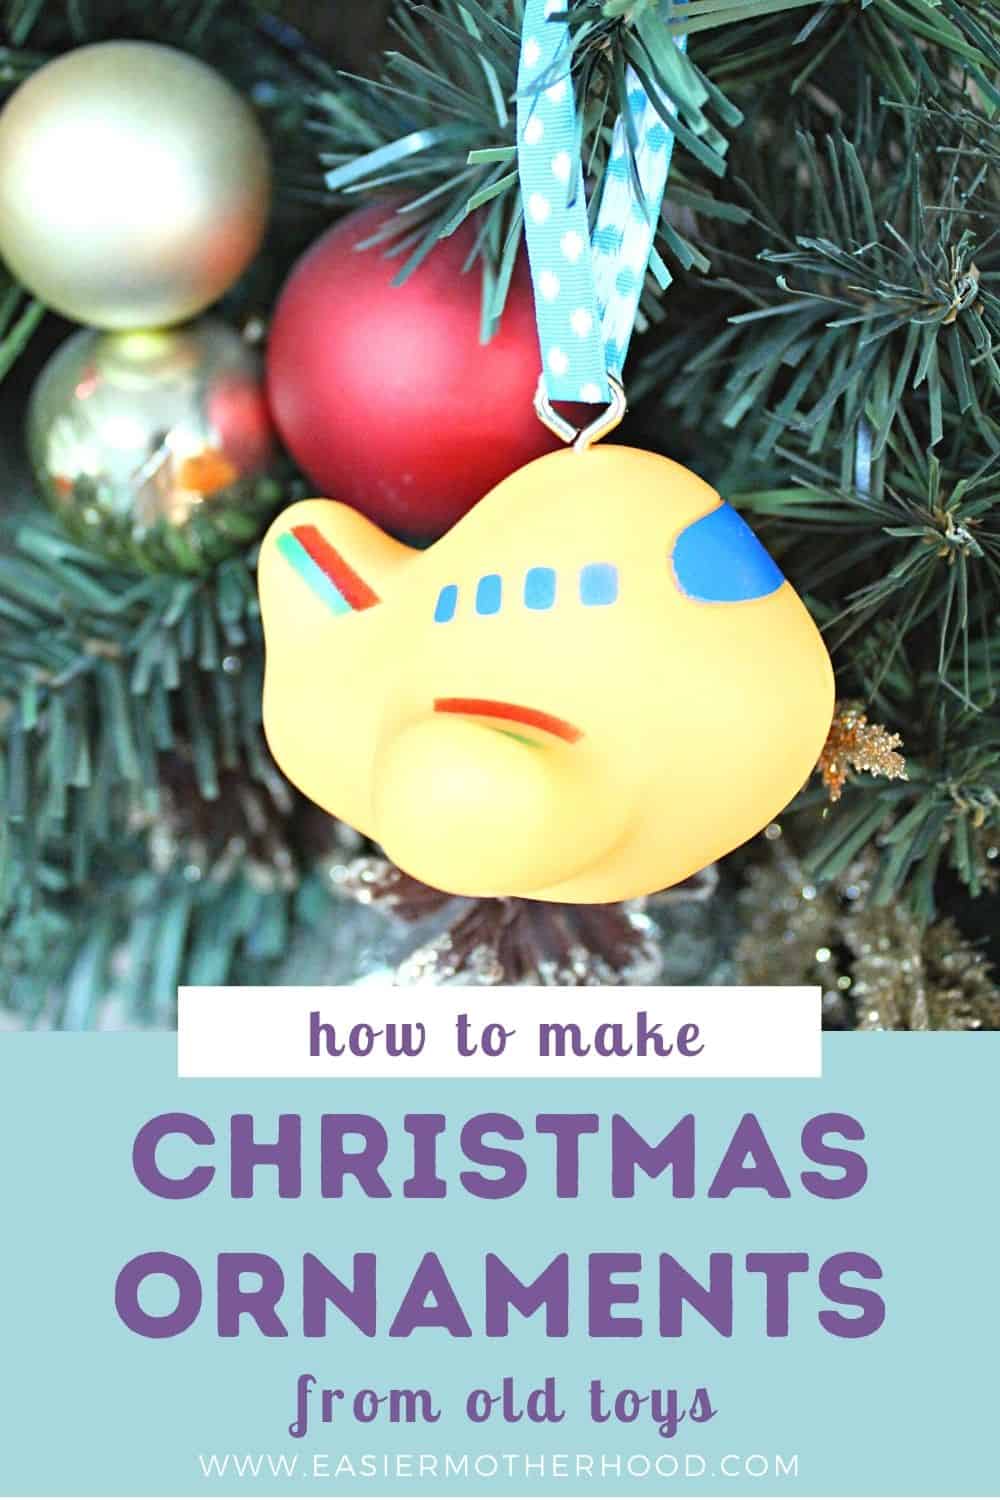 Pin has image of a toy plane that has been made into a Christmas ornament hanging with other decorations in the background. Text below the image reads "how to make christmas ornaments from old toys".